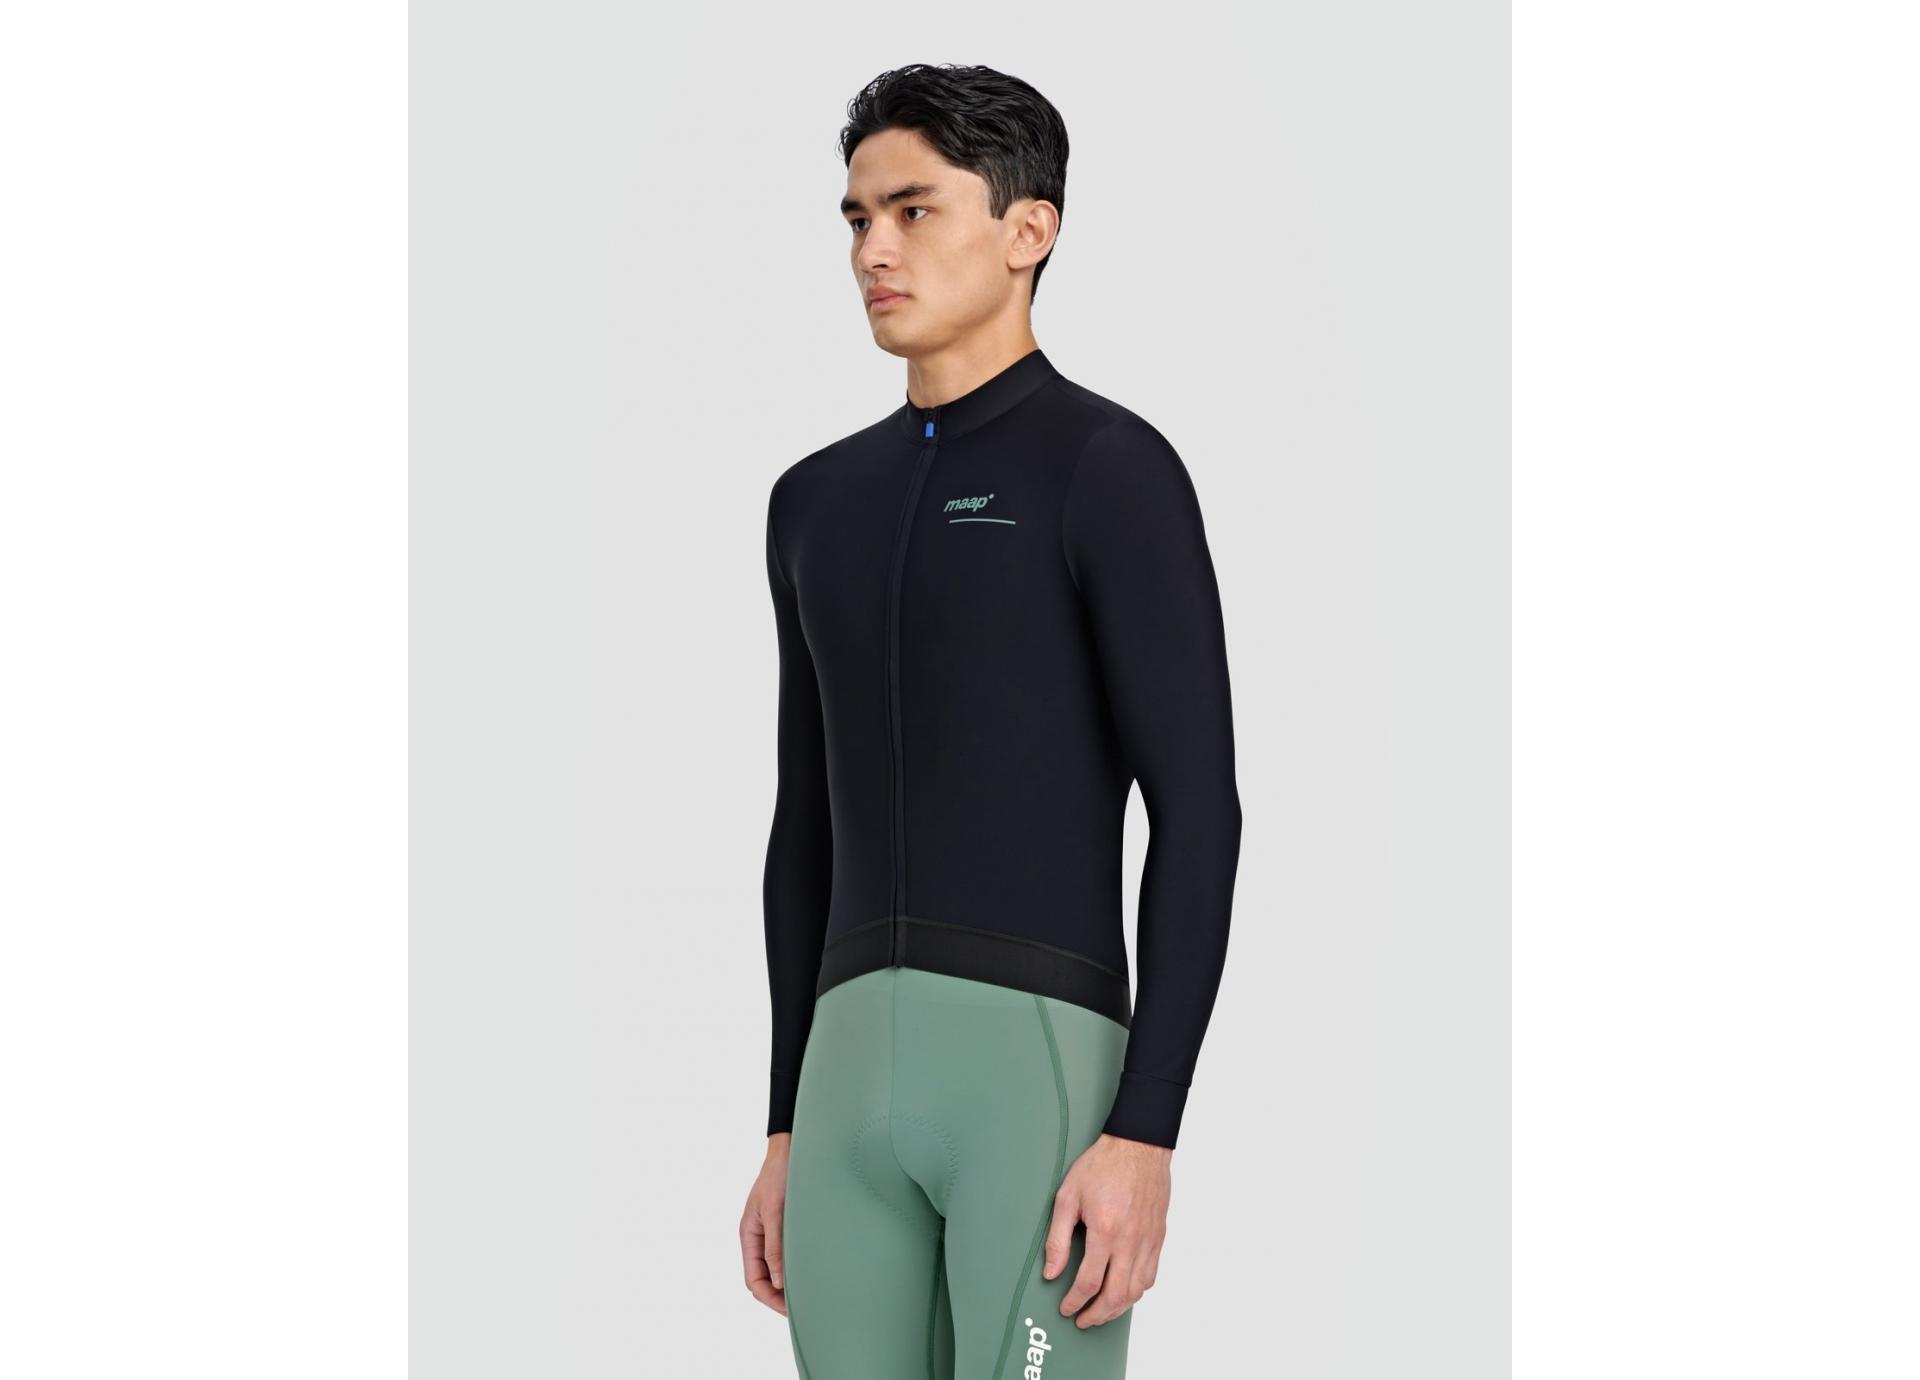 MAAP TRAINING THERMAL LS JERSEY - Velo7